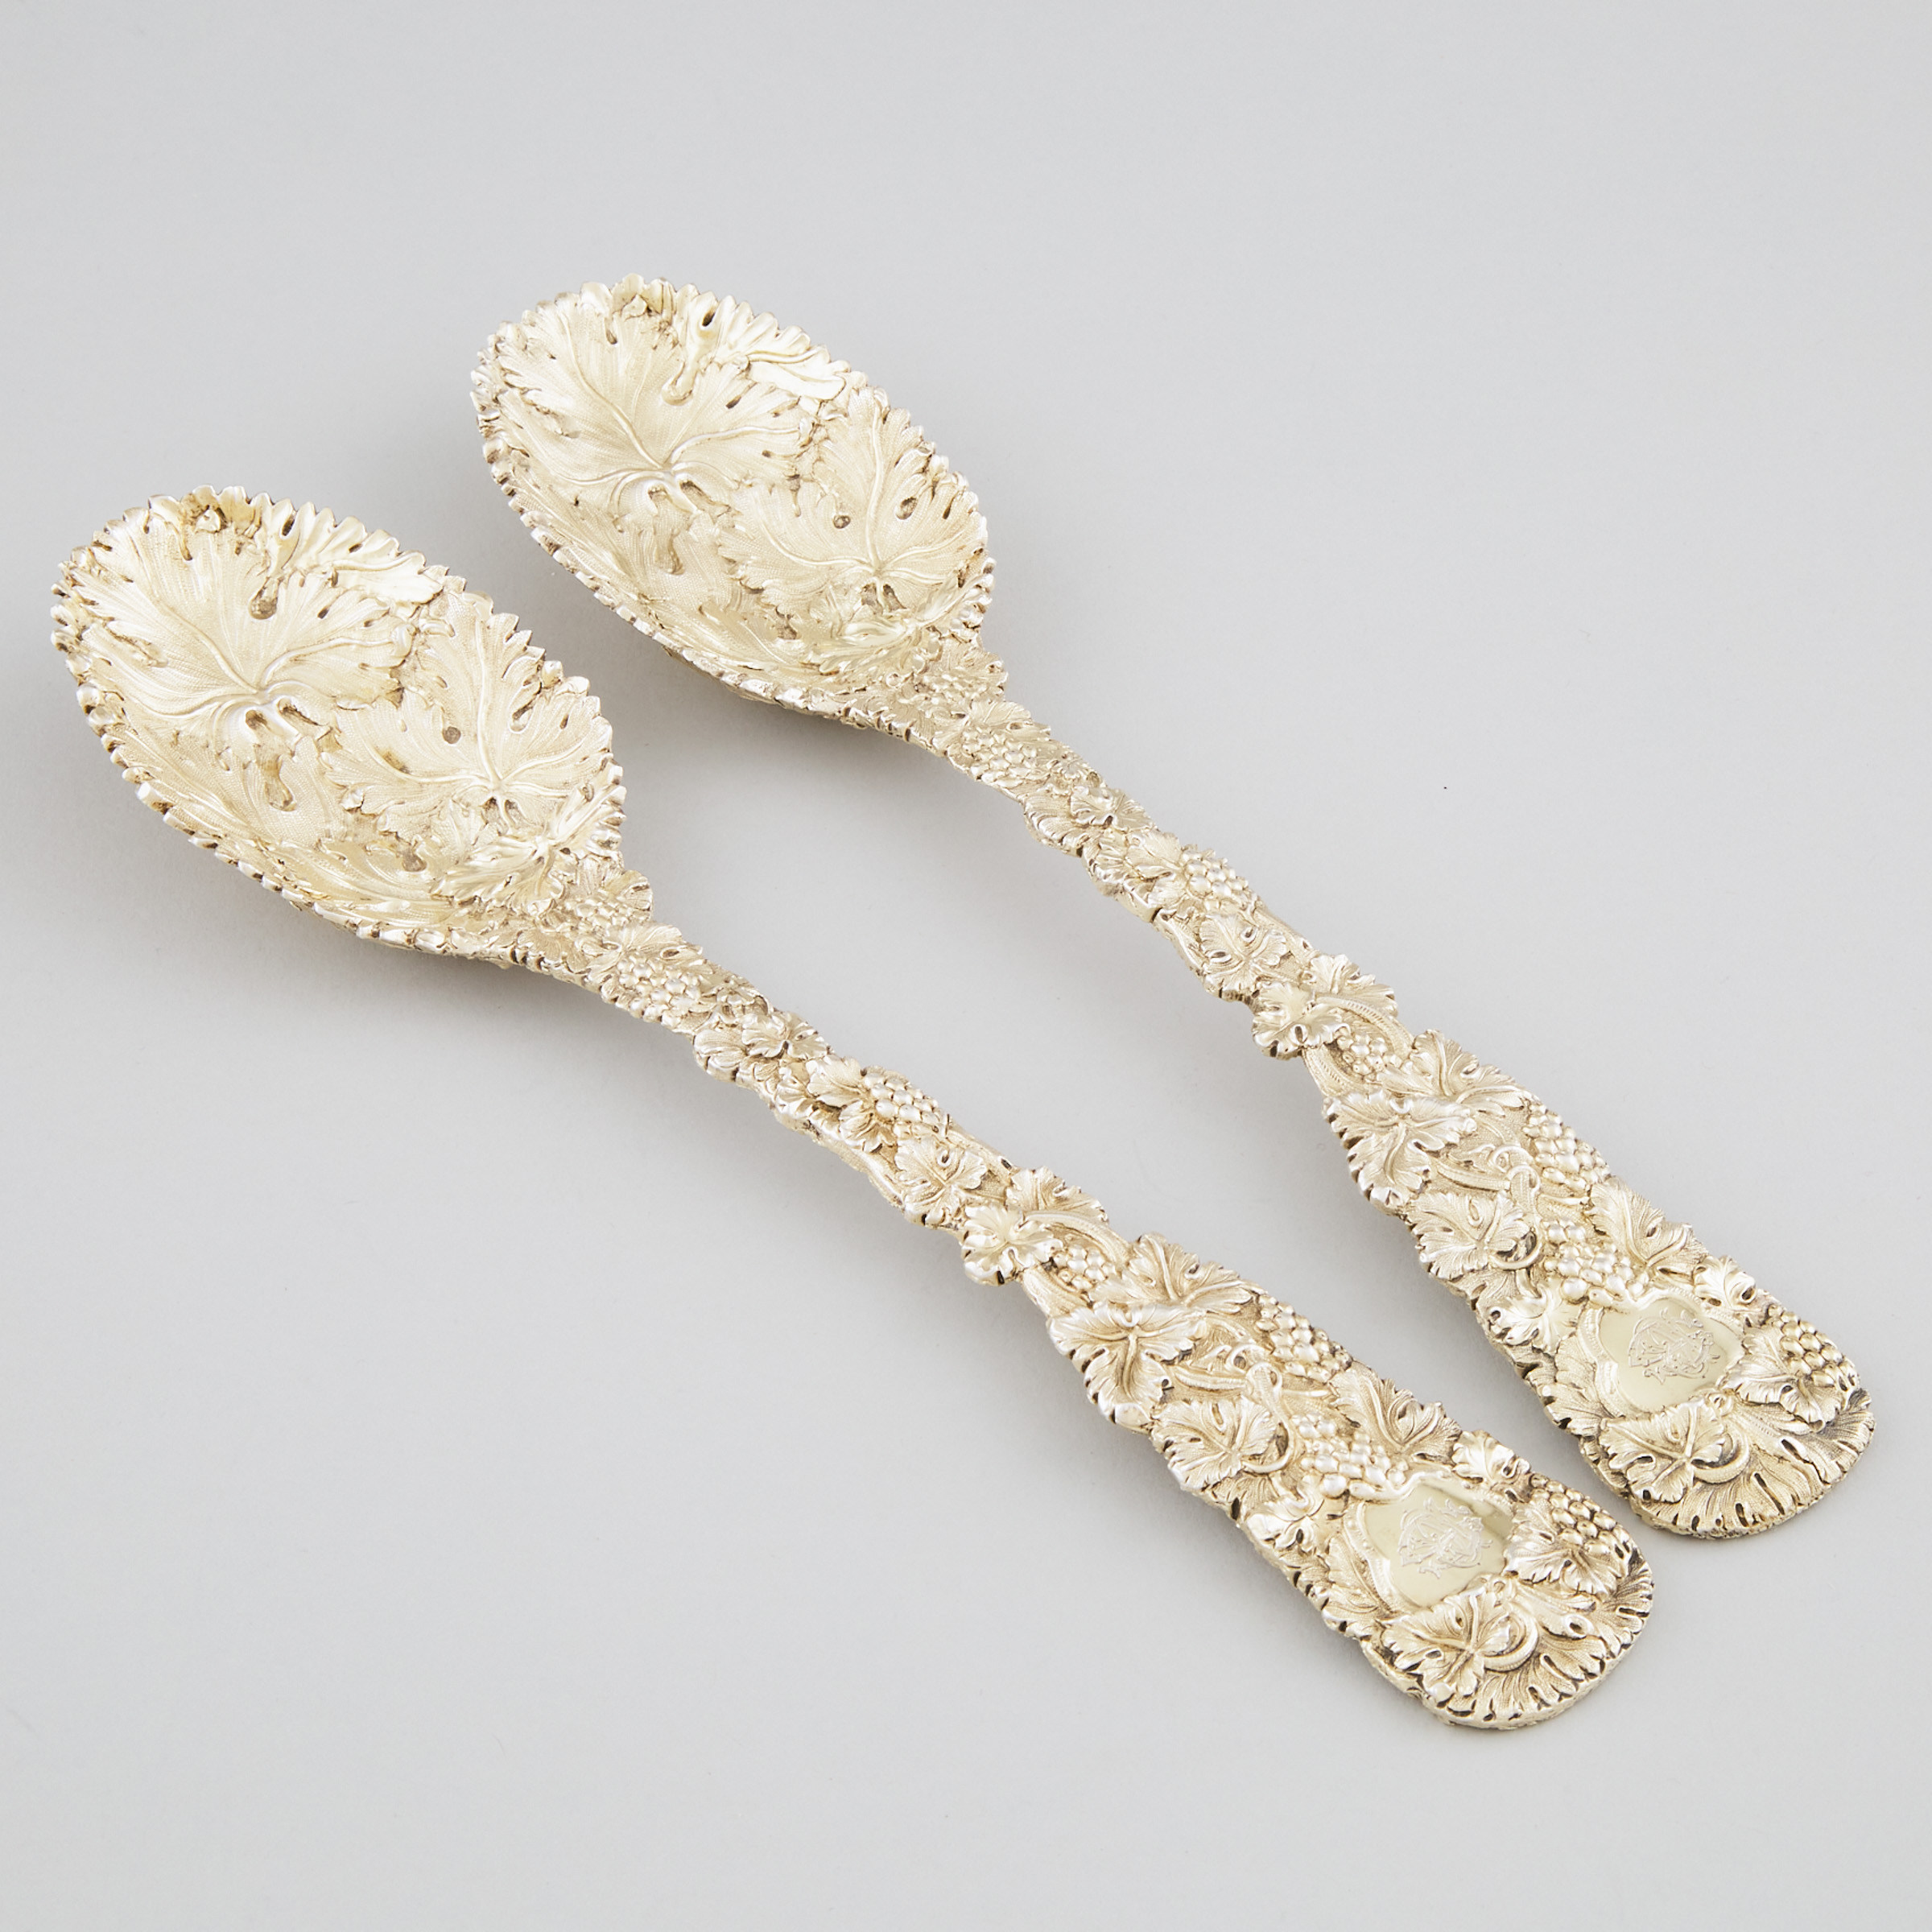 Pair of William IV Cast Silver-Gilt Berry Serving Spoons, Charles Reily & George Storer, London, 1832